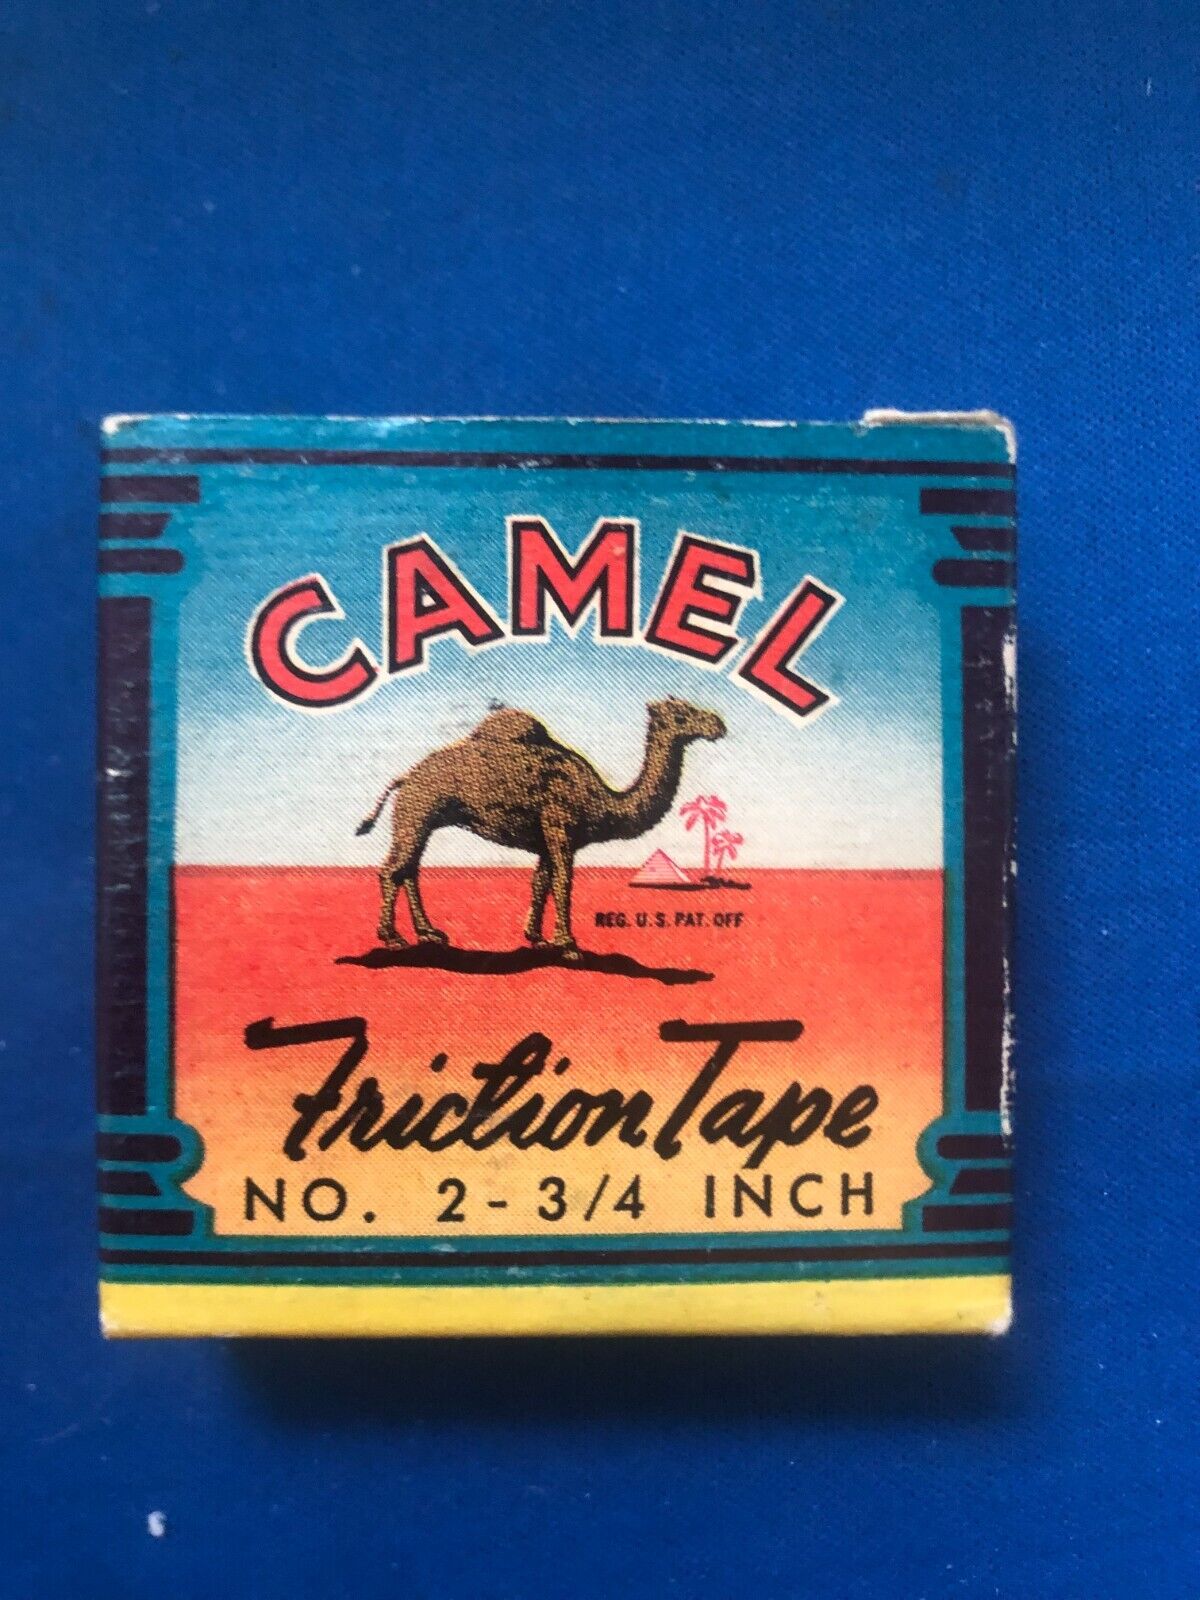 Vintage Camel Friction Tape With Box No. 2 Size 14 FT 3/4 Inch